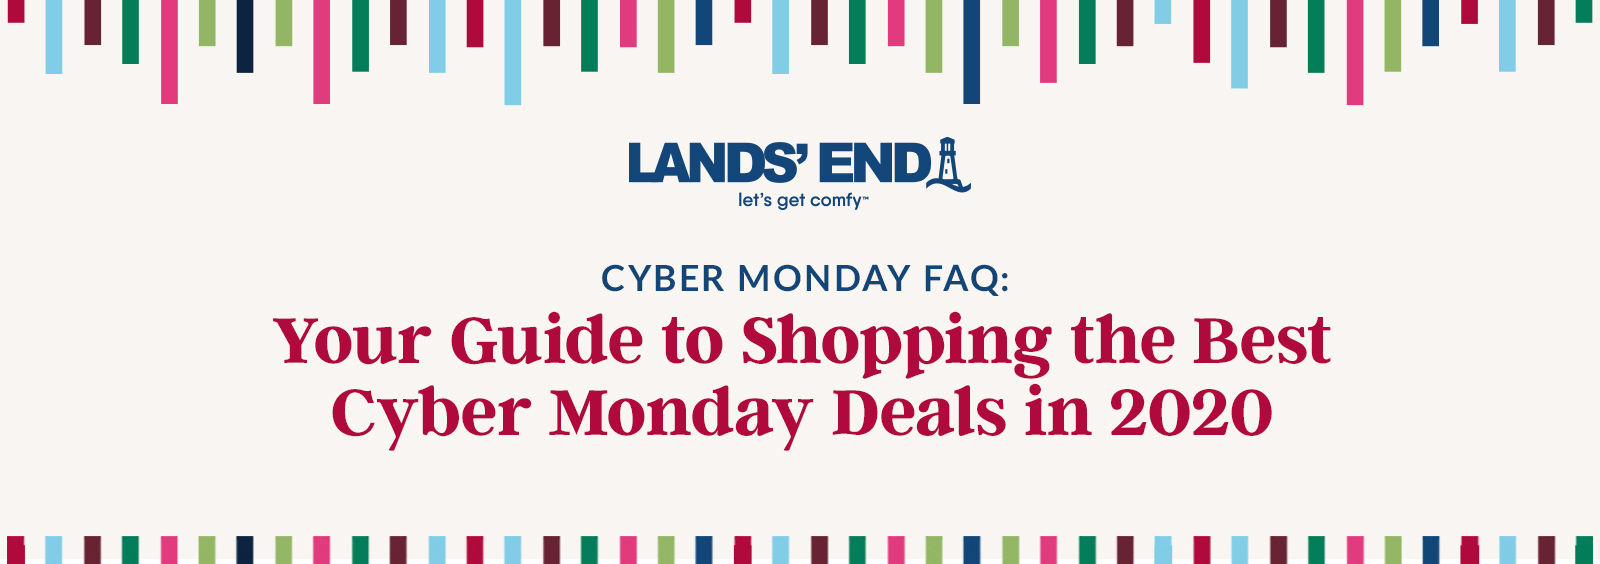 Cyber Monday FAQ: Your Guide to Shopping the Best Cyber Monday Deals in 2020